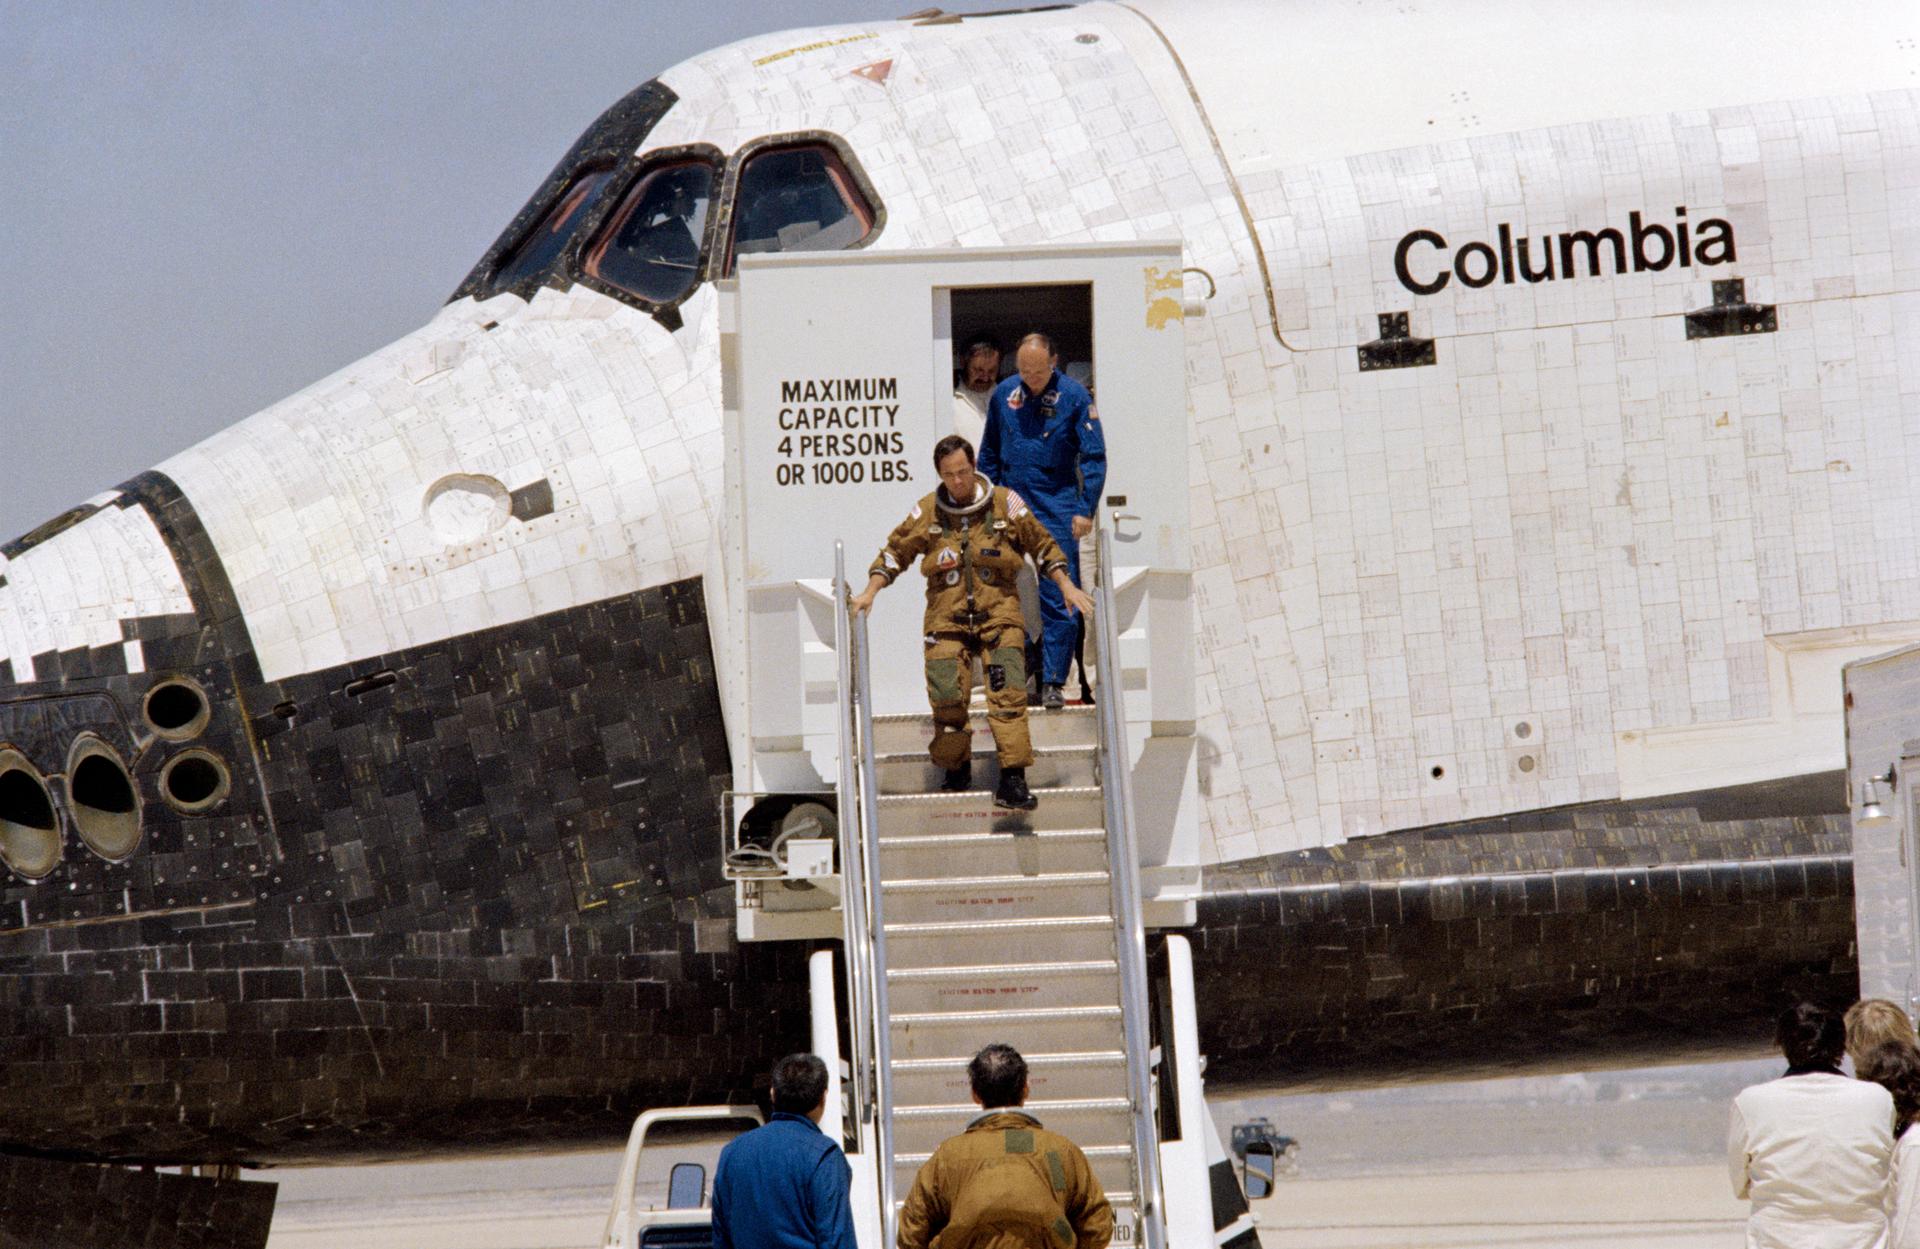 STS-1 Pilot Robert Crippen exits space shuttle Columbia following touchdown at Edwards Air Force Base on April 14, 1981.